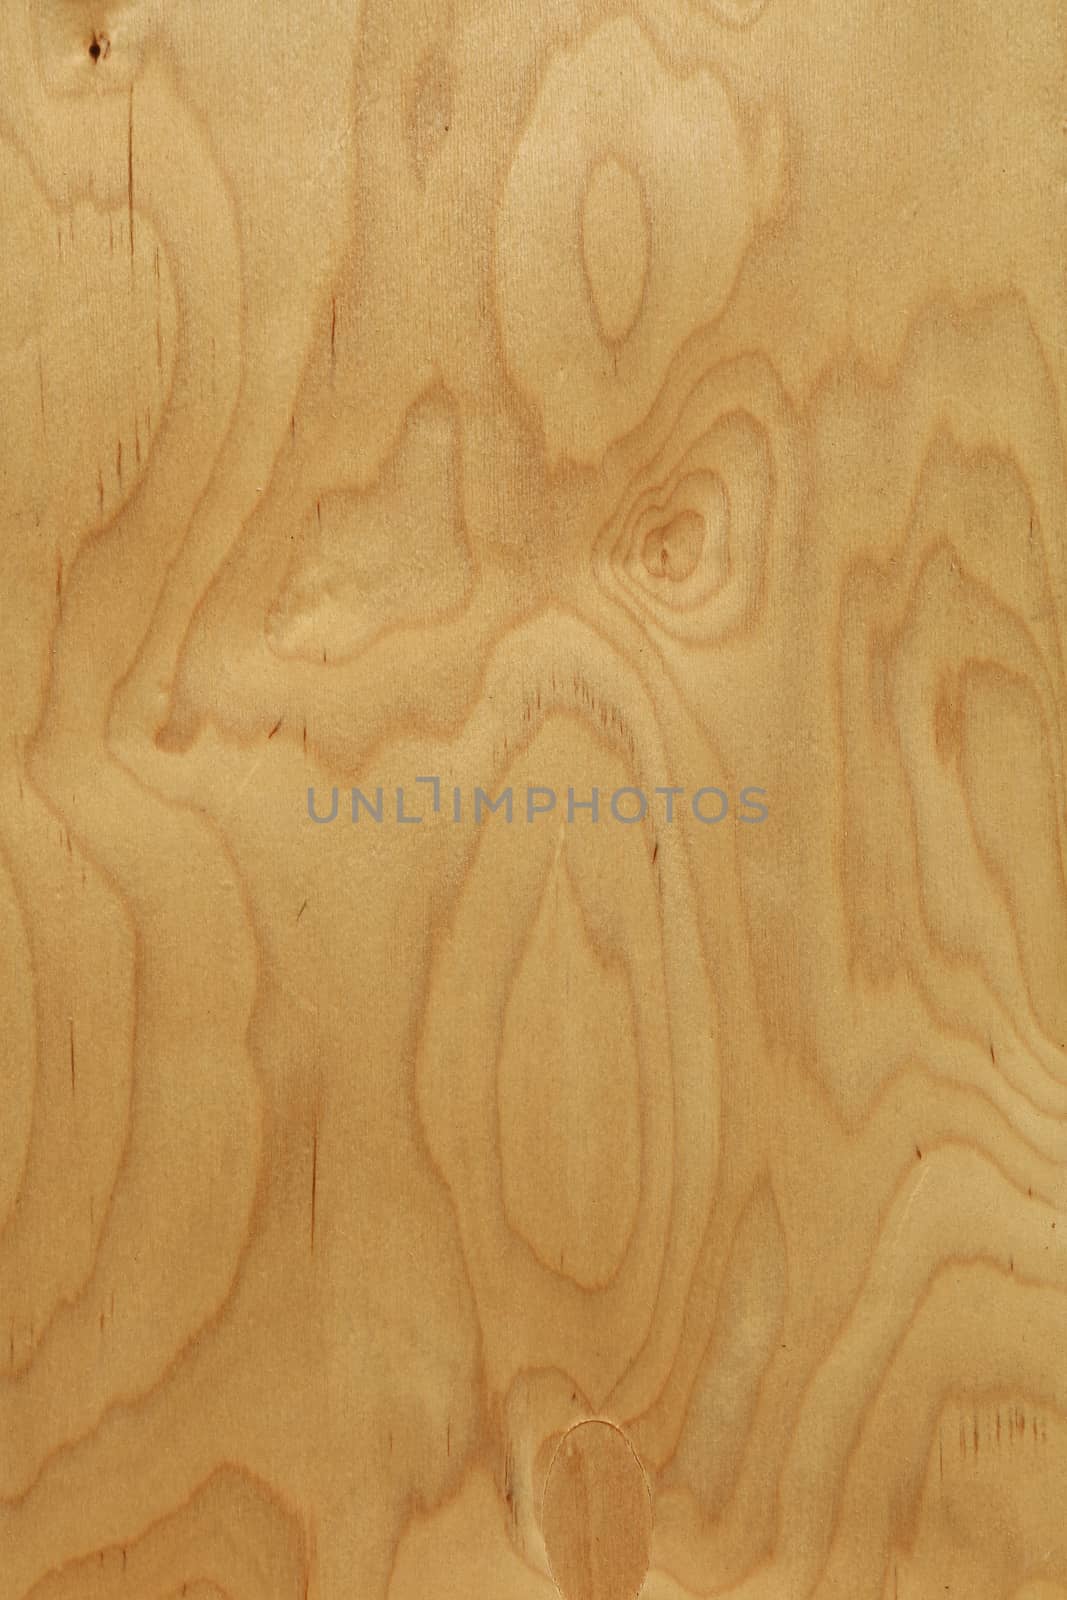 Rough unpainted beige plywood wood grain background texture close up